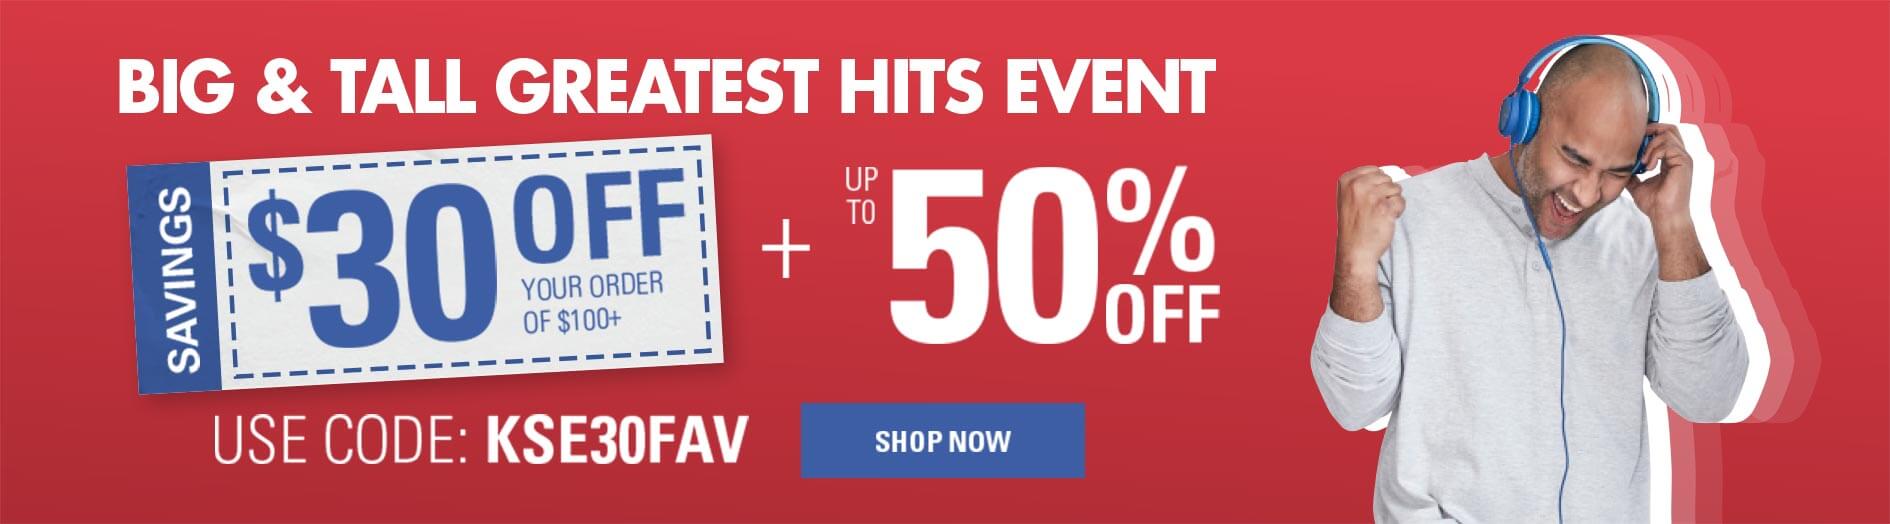 Big & Tall Greatest Hits Event, $30 OFF $100+ WITH CODE KSE30FAV PLUS UP TO 50% OFF